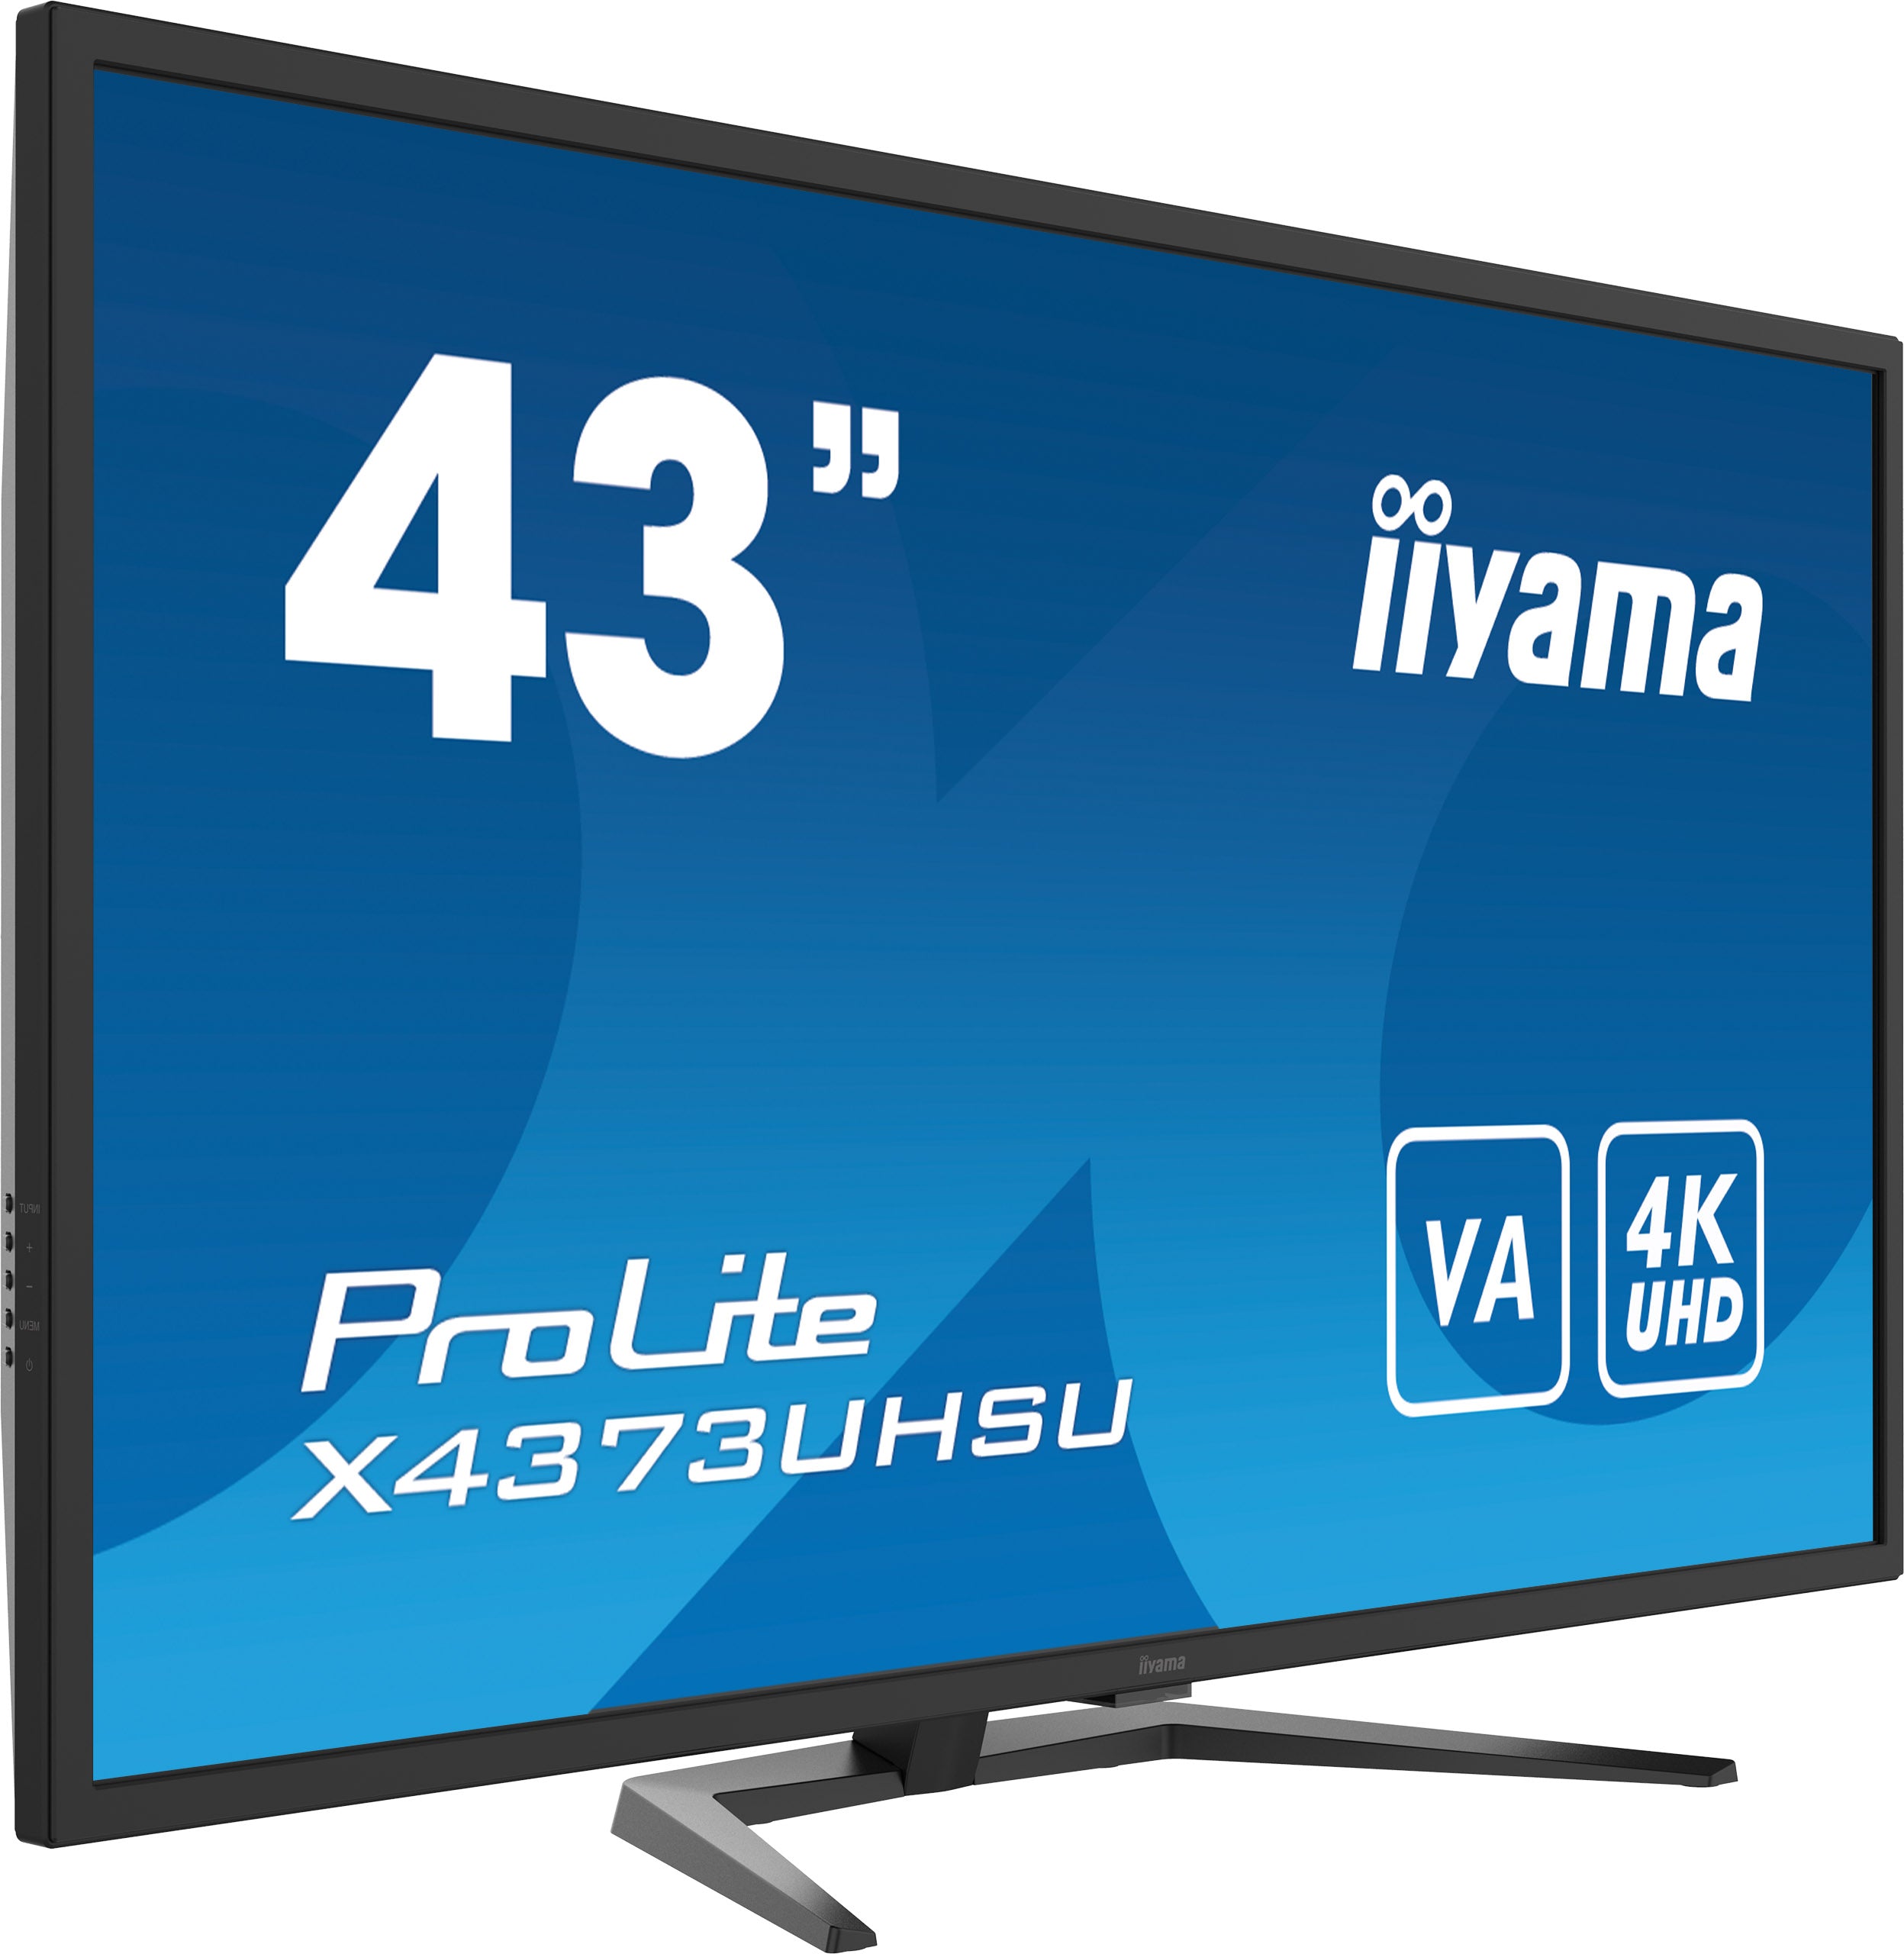 Press Release: The New iiyama ProLite 43" X4373UHSU - Power of Four Displays Packed in One.